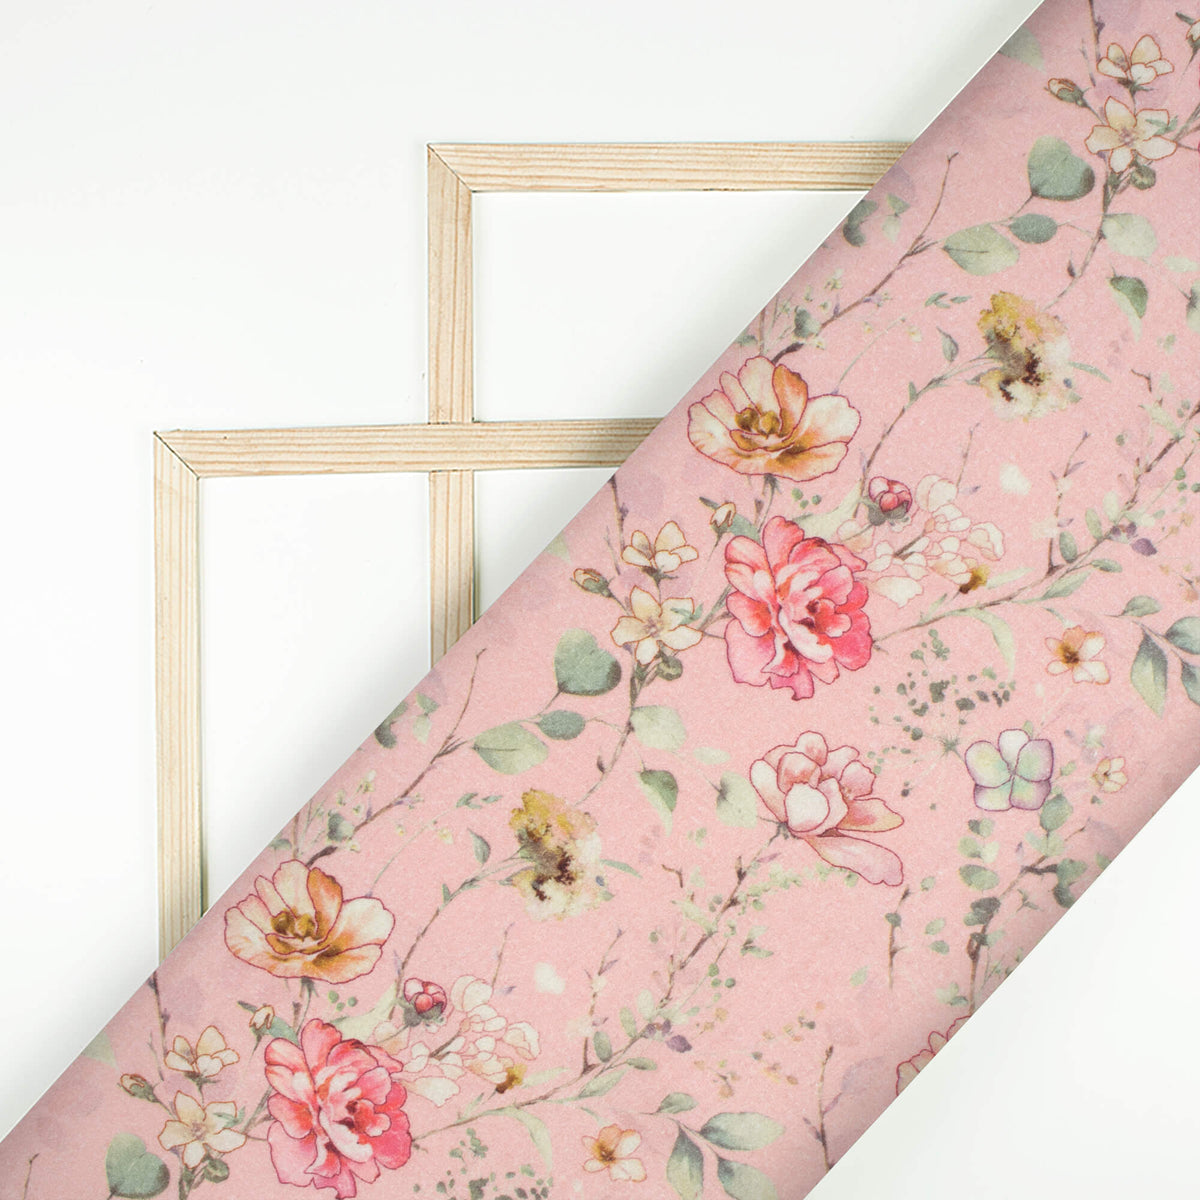 Salmon Pink And Beige Floral Digital Print Cotton Cambric Fabric